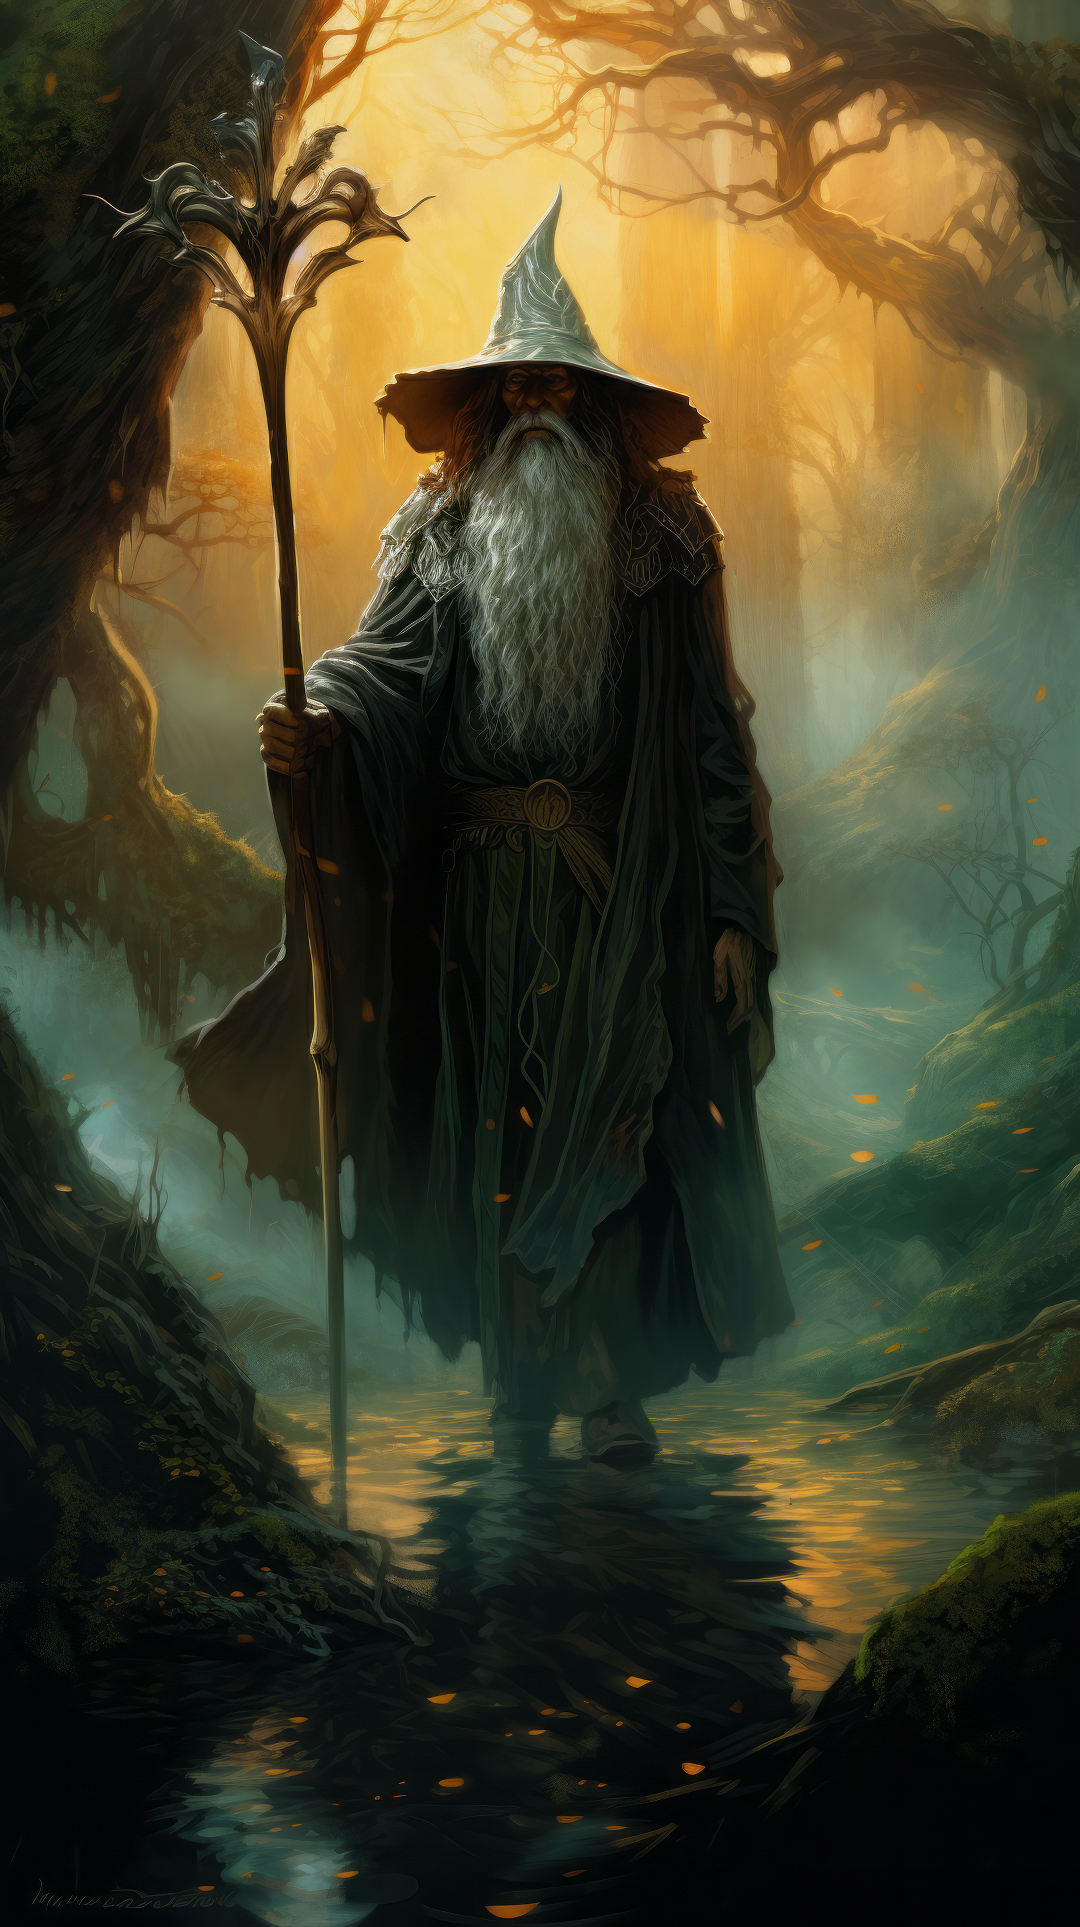 Fantasy wizard phone wallpaper inspired by Lord of the Rings, featuring a mage with a staff in a mystical forest setting.